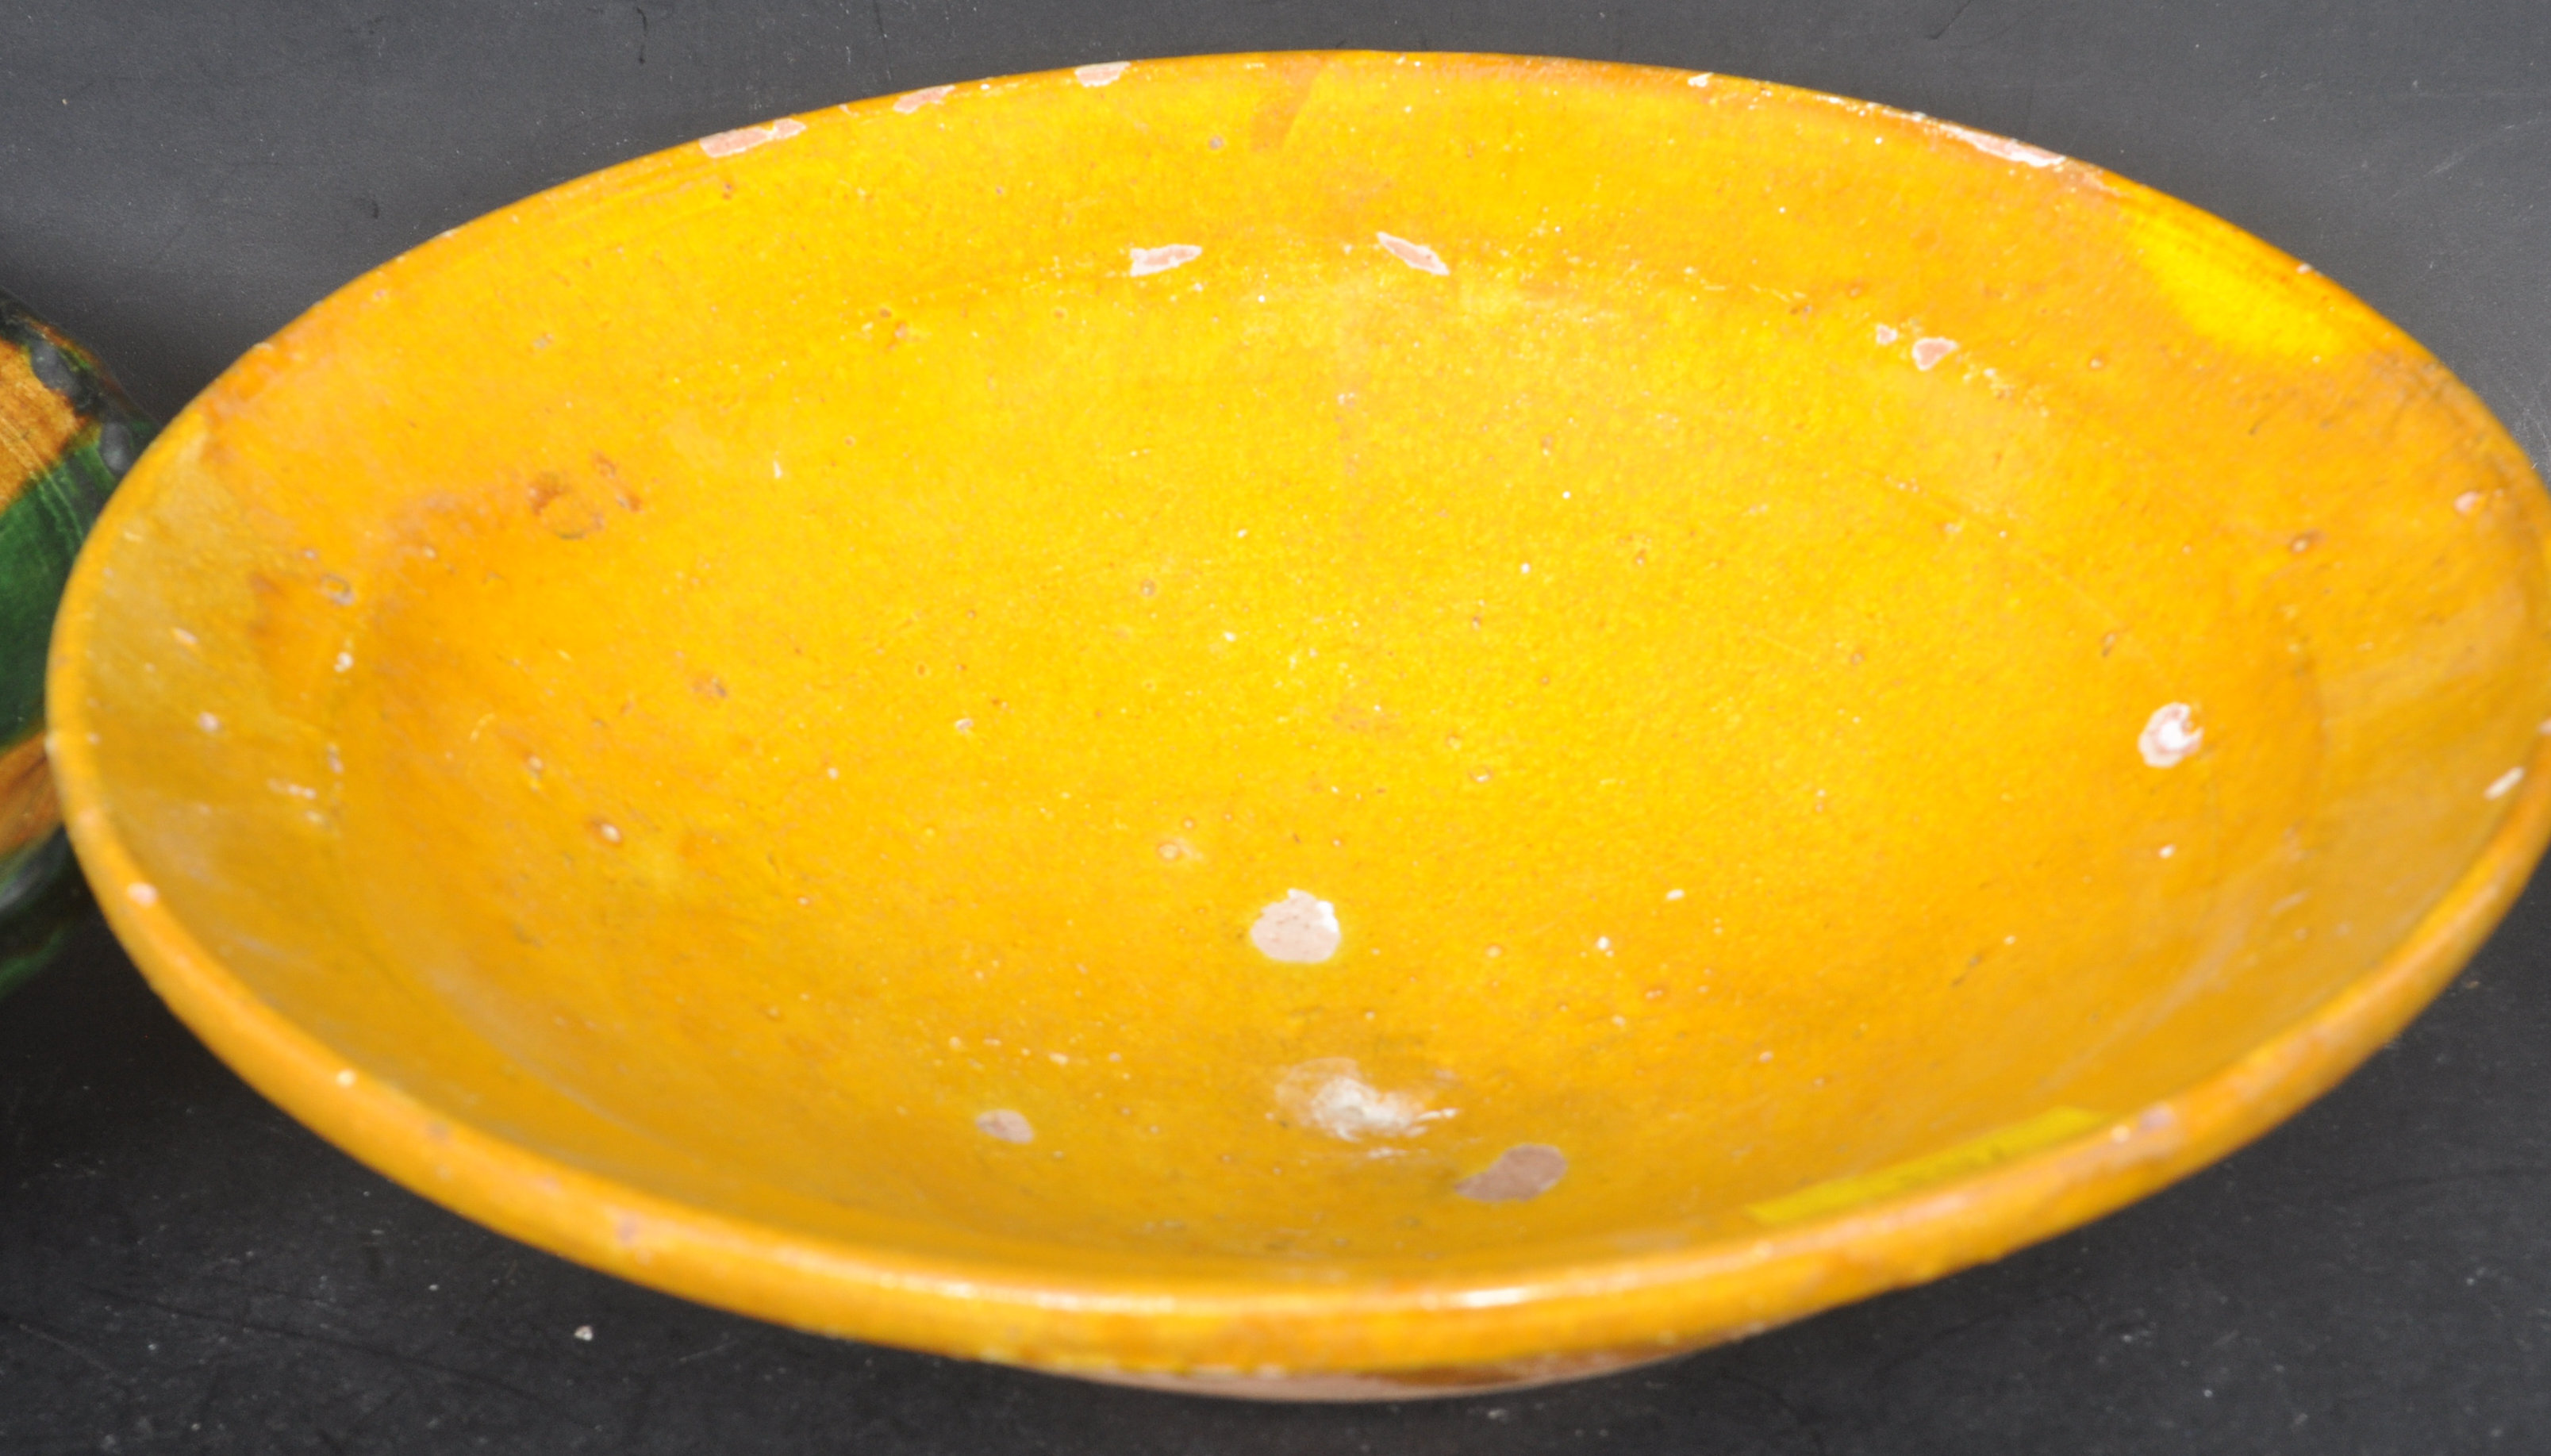 PAIR OF EARTHENWARE CENTREPEICE FRUIT BOWLS - Image 3 of 5